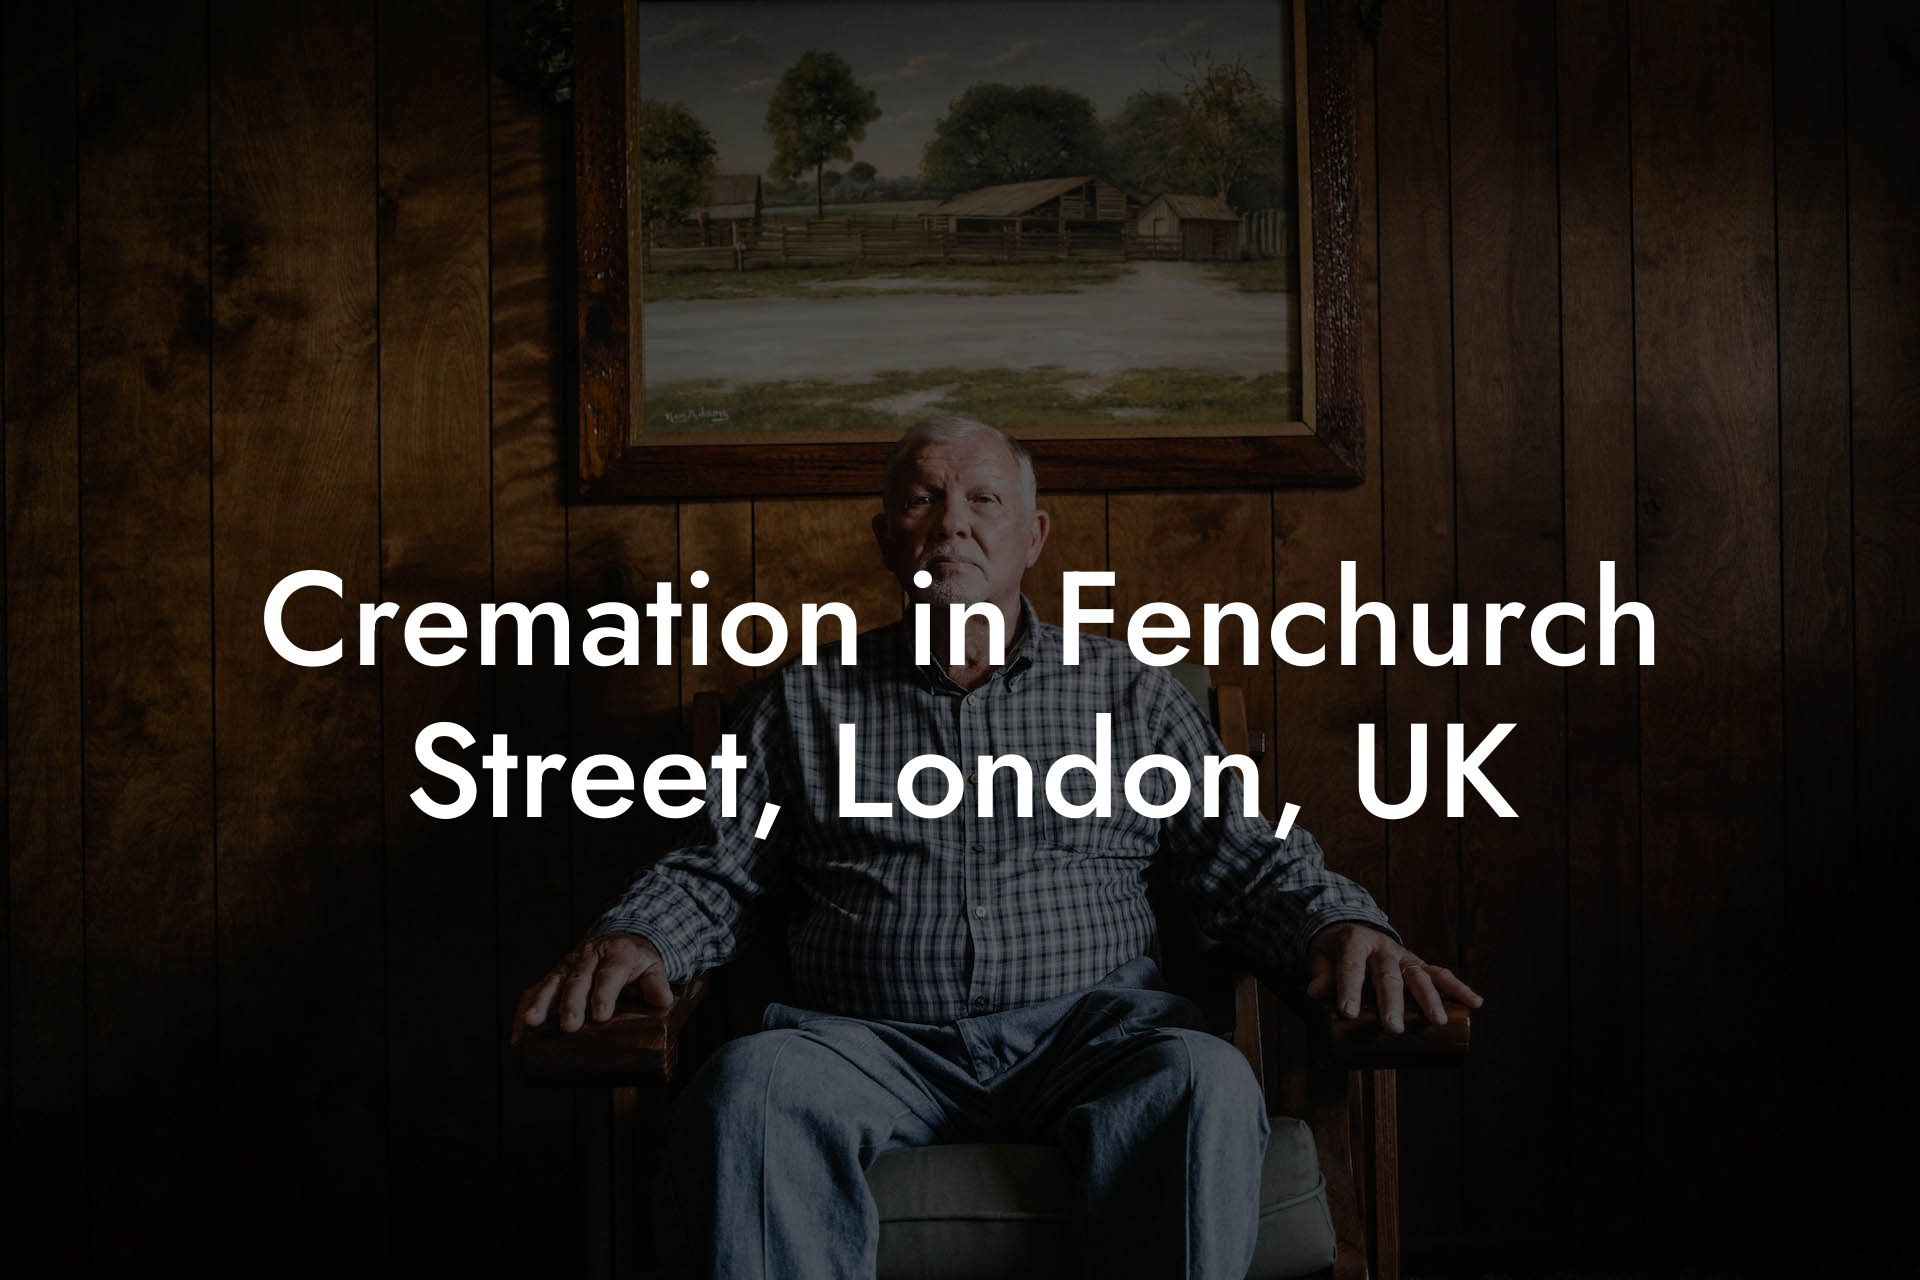 Cremation in Fenchurch Street, London, UK